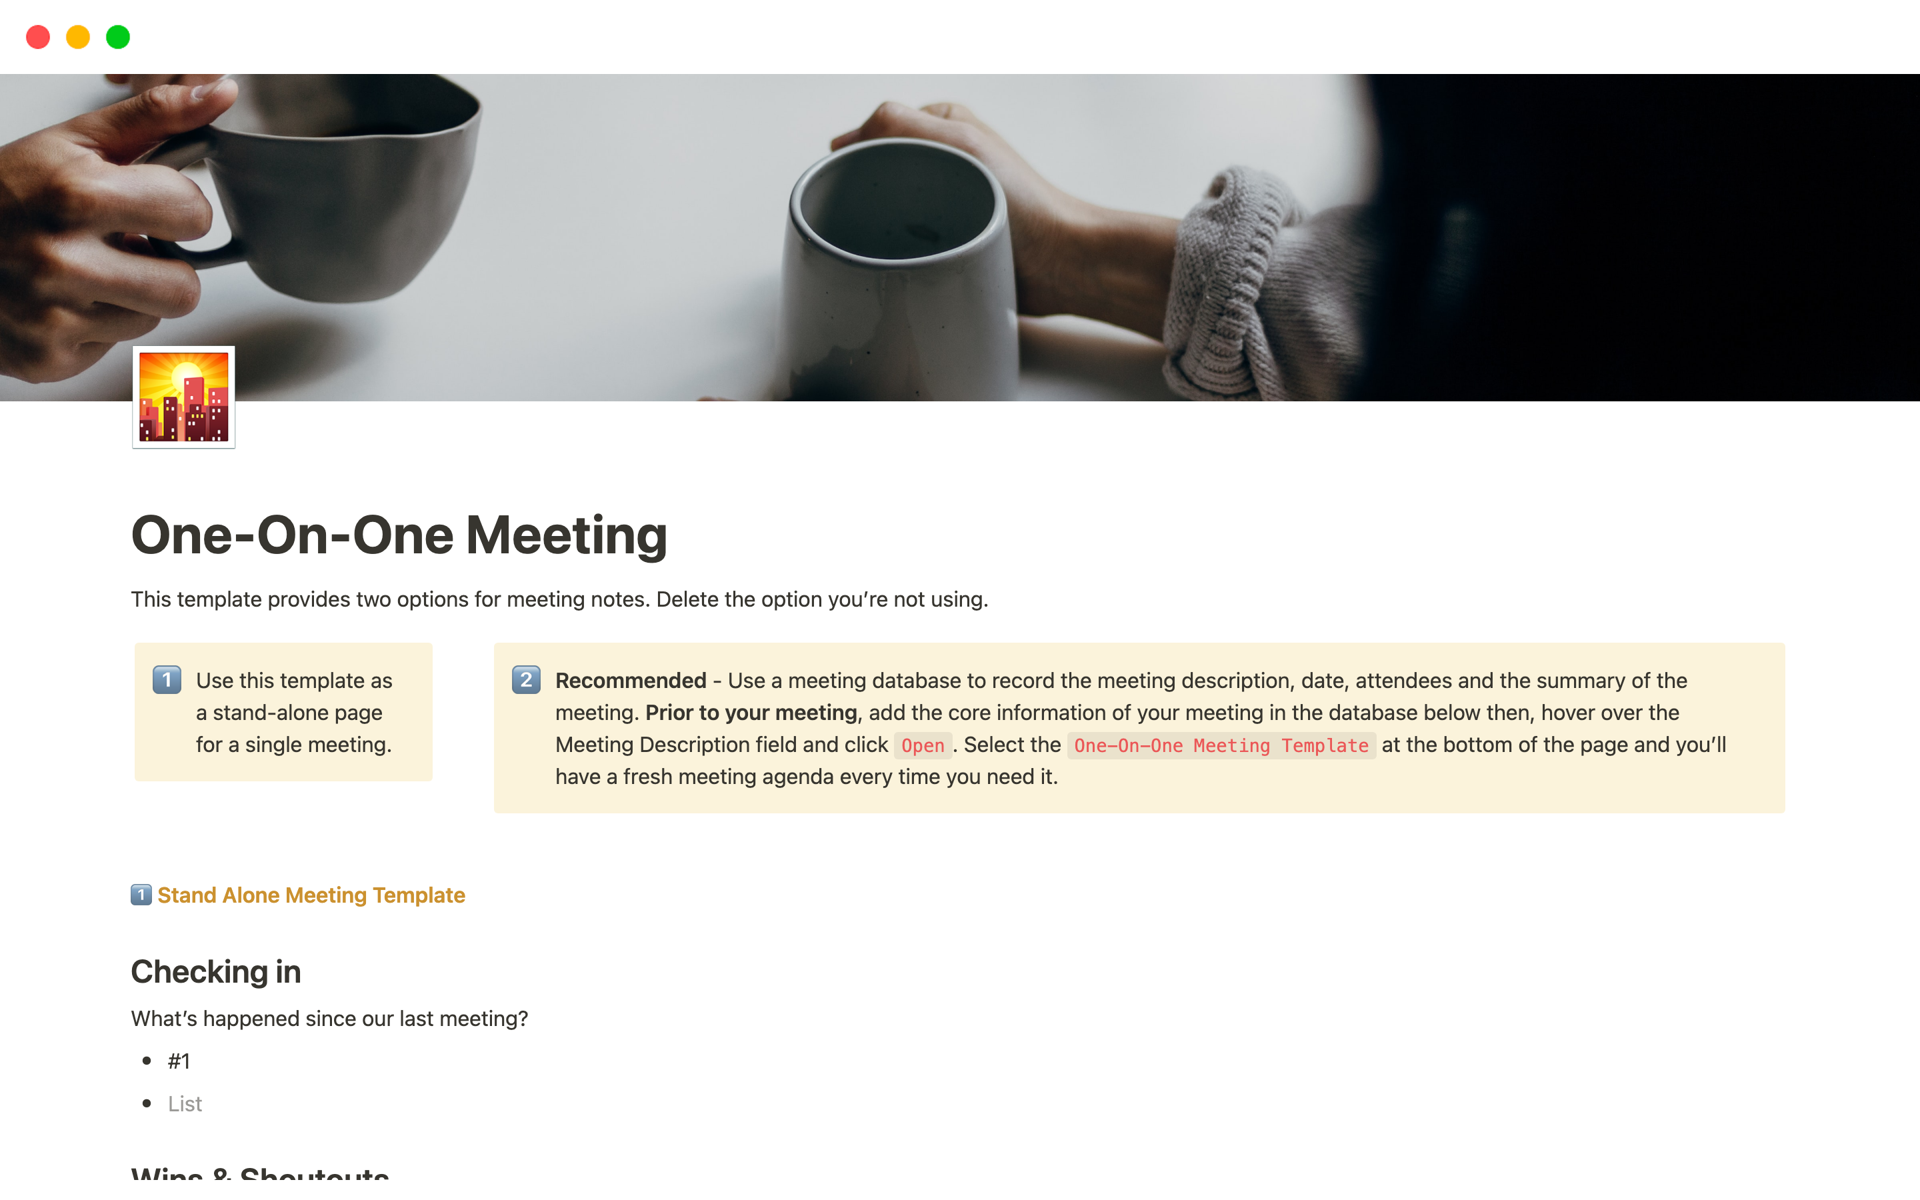 This template is perfect for one-on-one meetings between managers and team members.